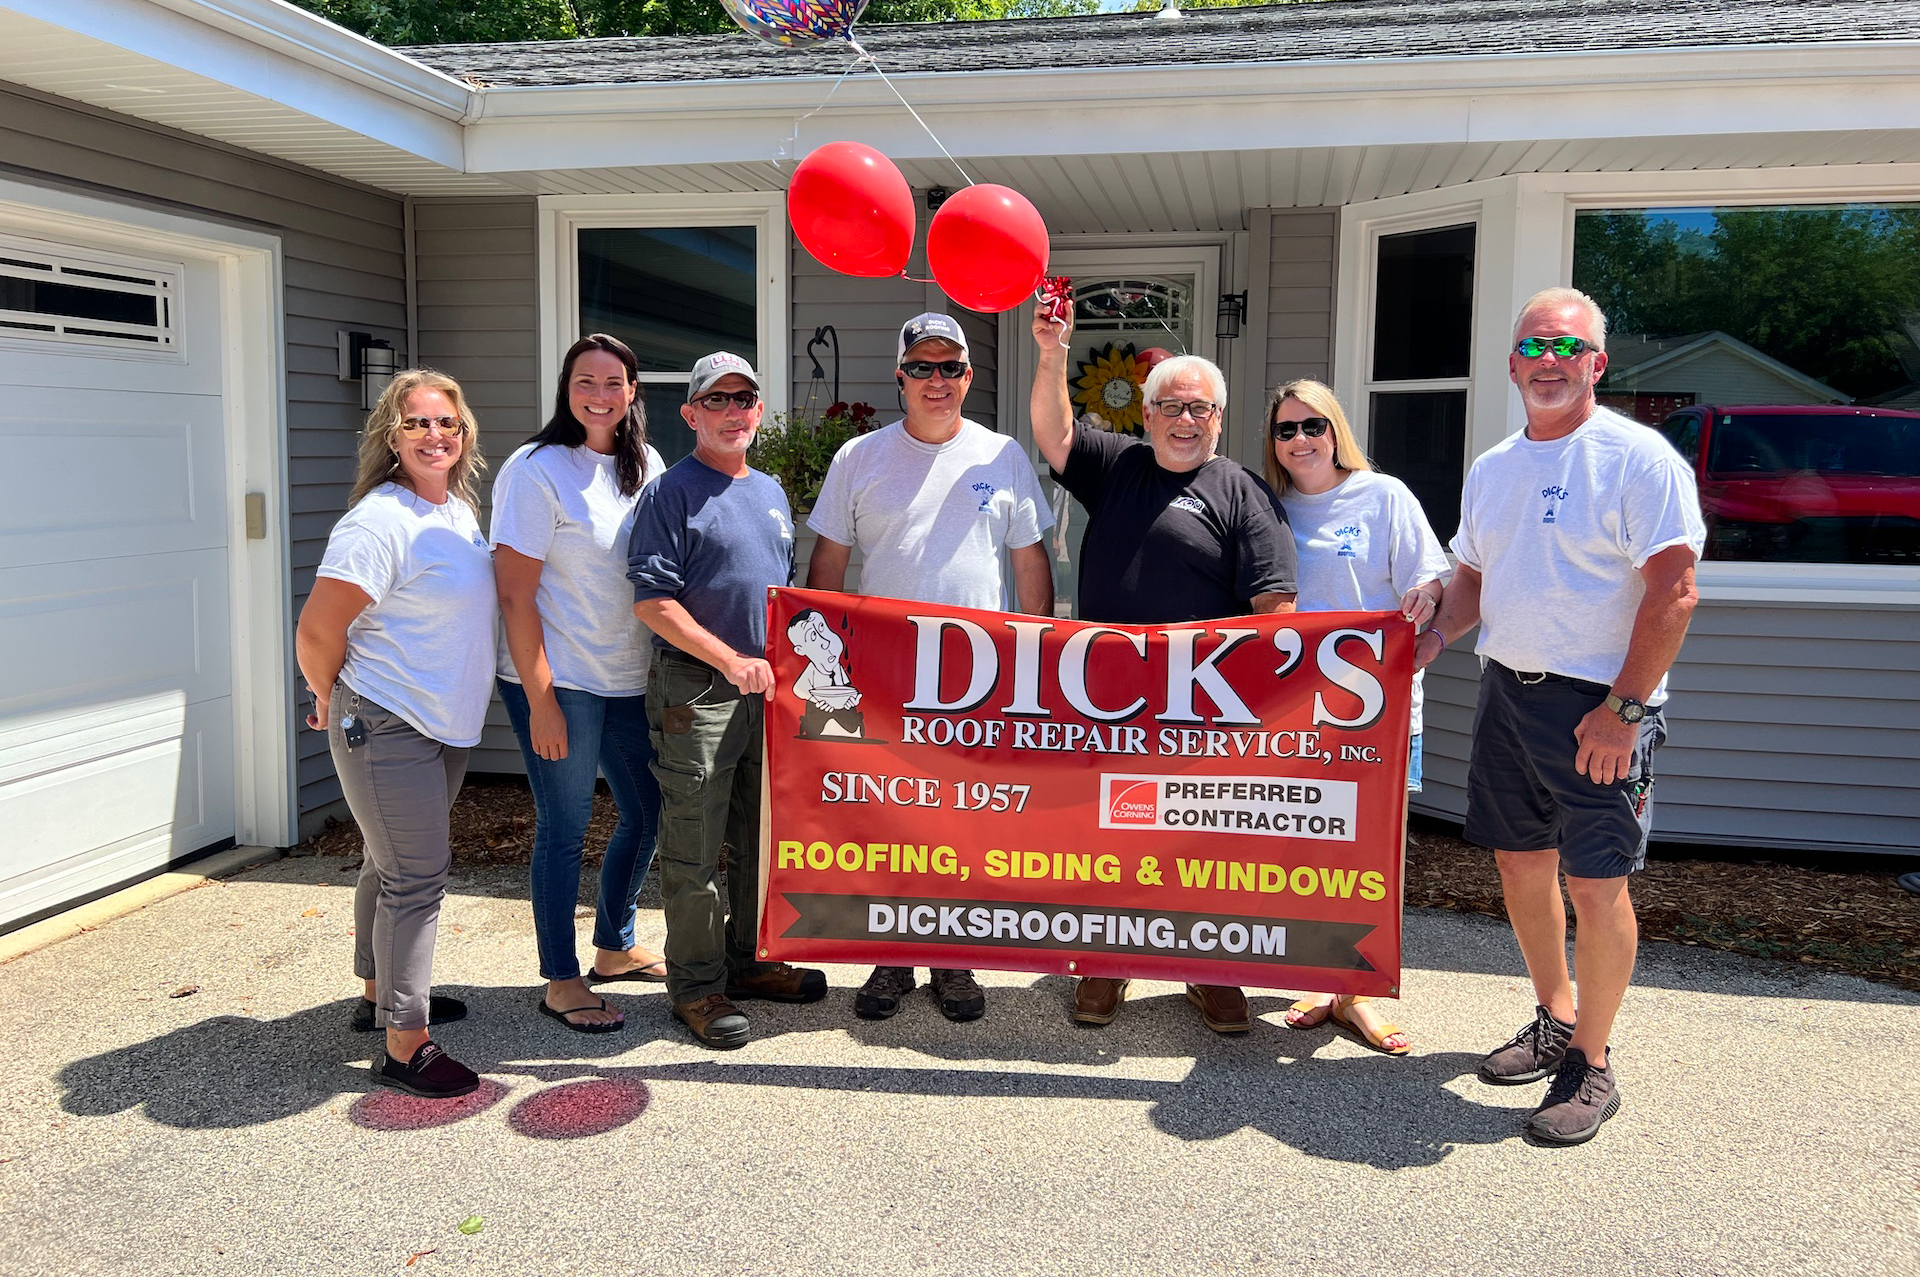 Celebrating Community Service: Dick’s Roofing Honors Volunteer Bill Roberts with a Free Roof